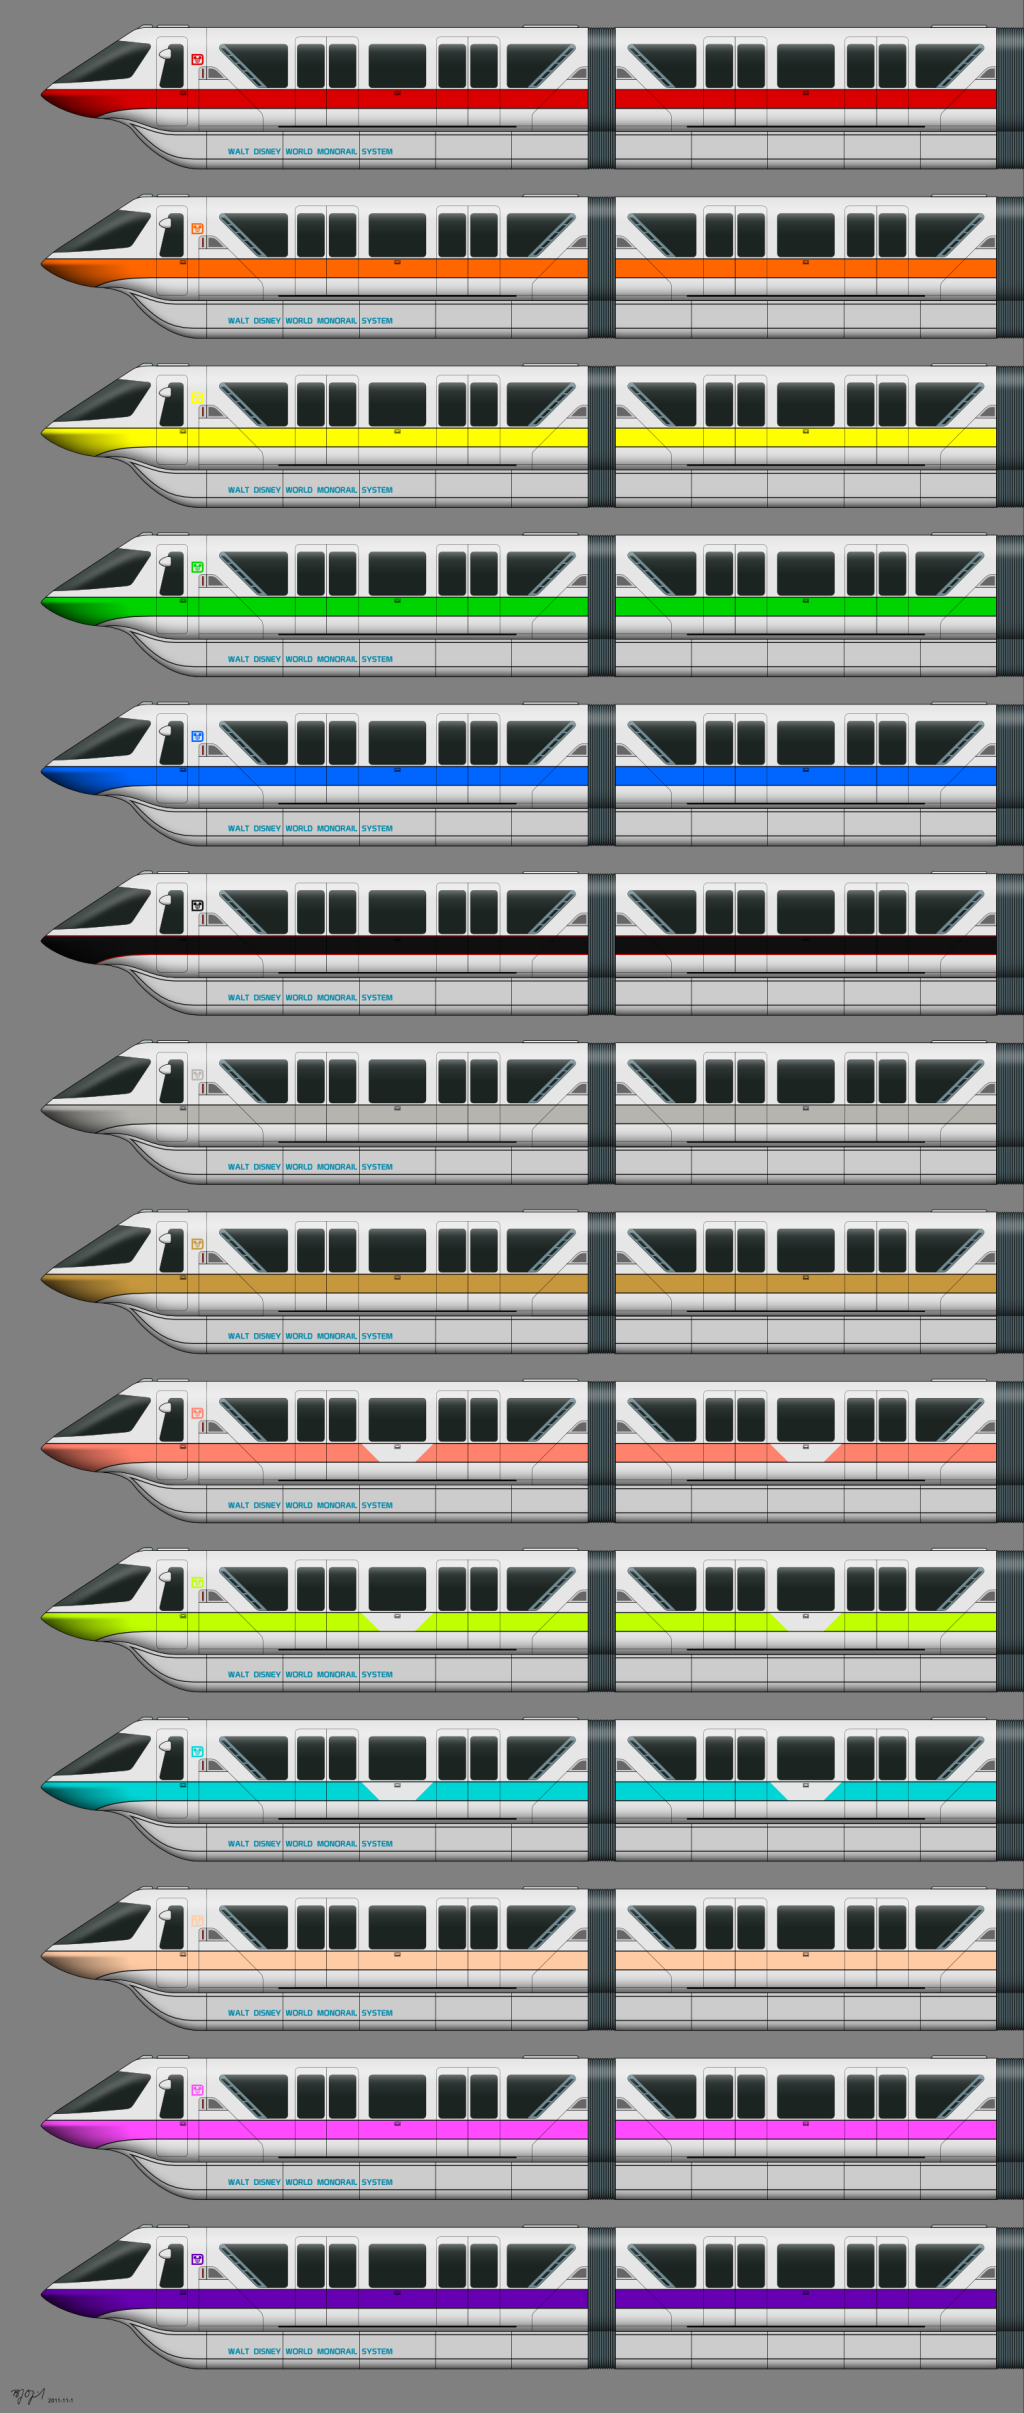 Picture of: WDW Monorail – All Colors by BJ-O on DeviantArt